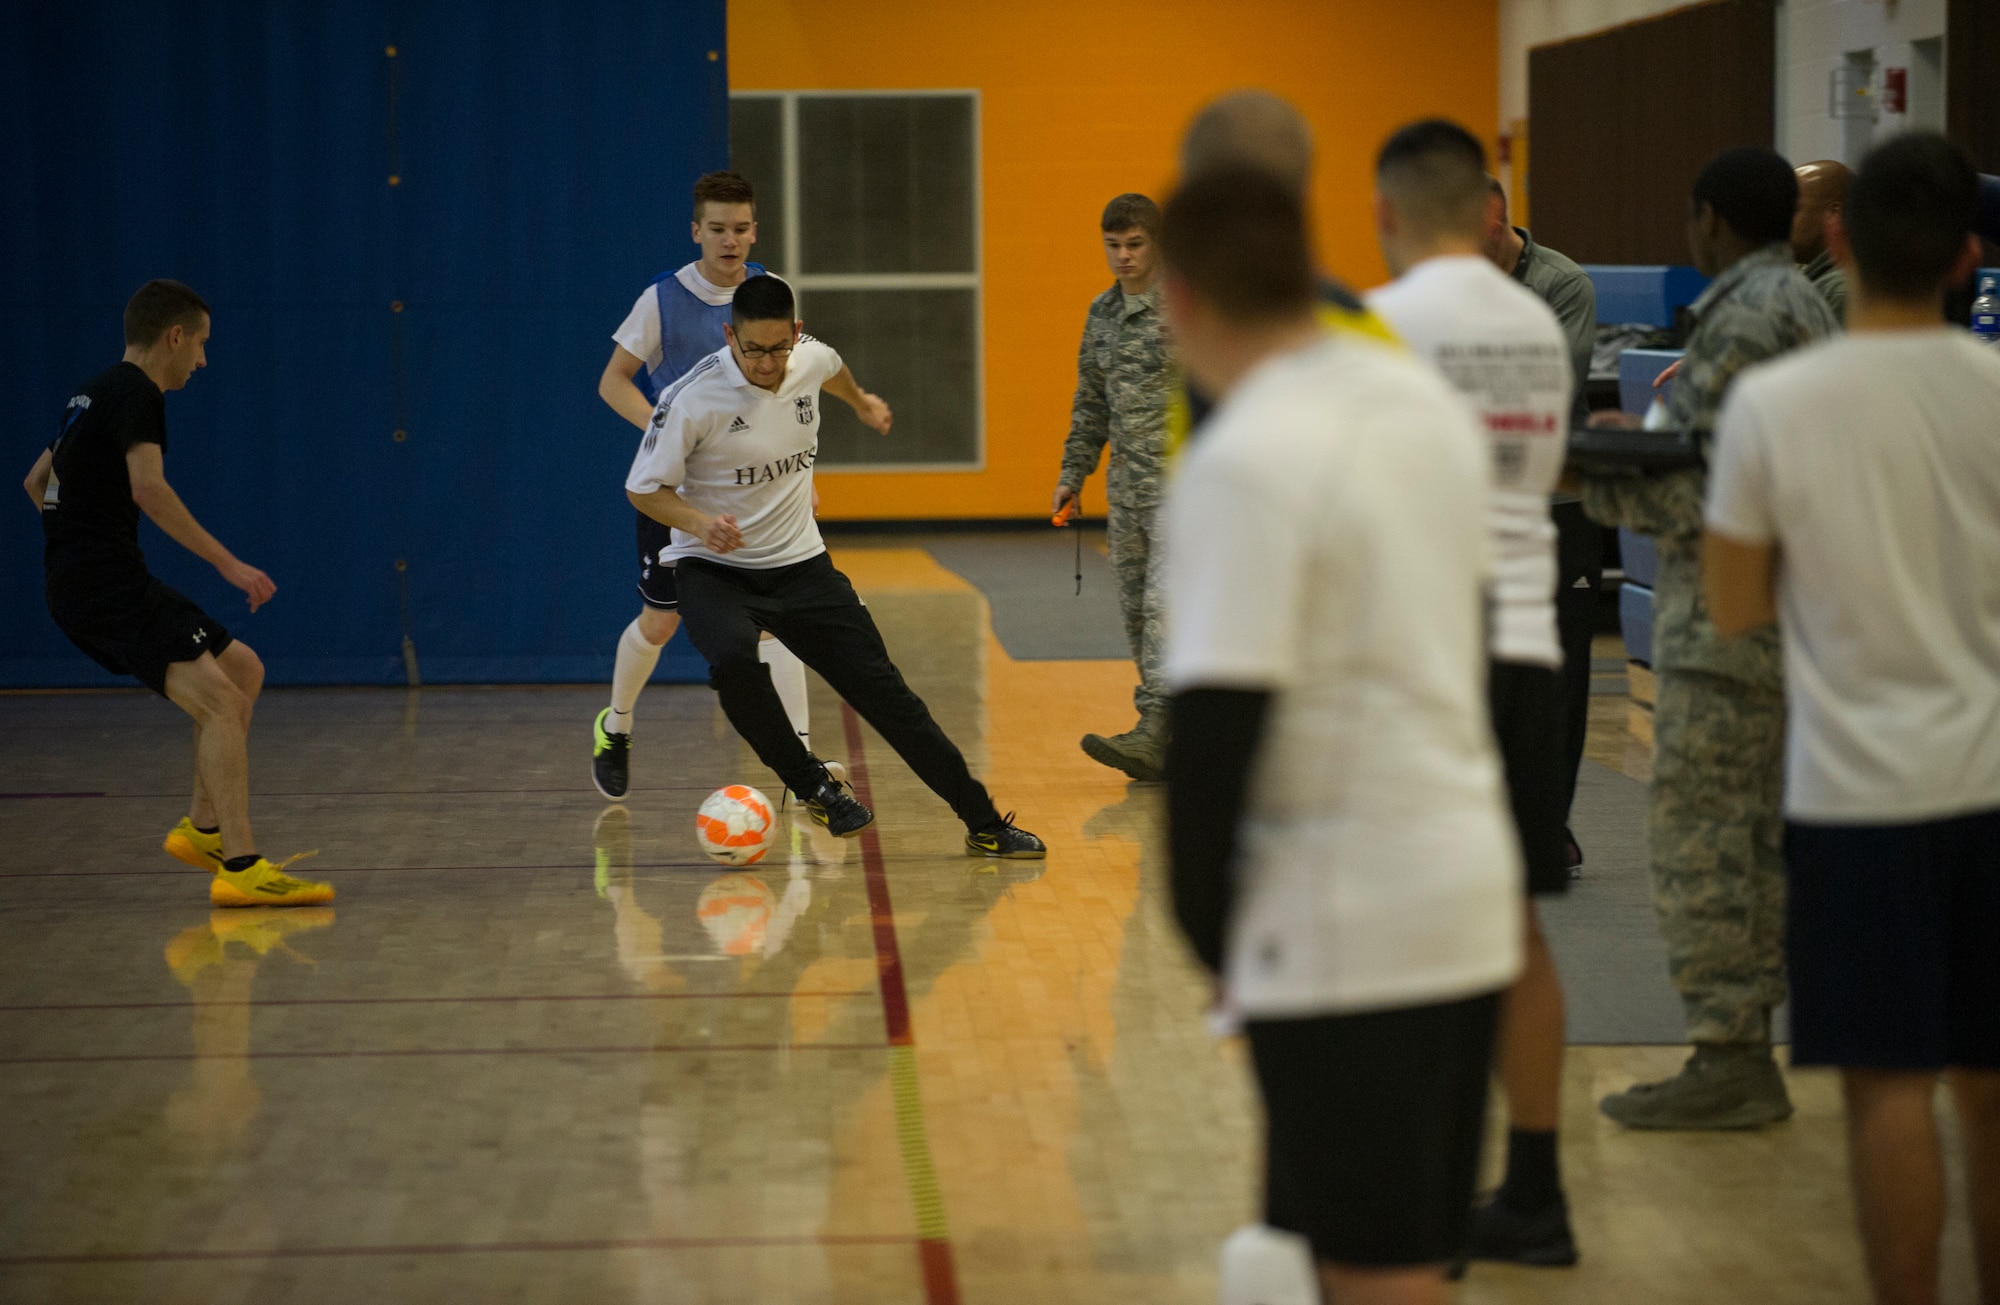 An Airman from the 5th Medical Group controls the ball during the intramural indoor soccer championship at Minot Air Force Base, N.D., Nov. 24, 2015. The game between the 5th MDG and 5th Contracting Squadron resulted in a win for 5th CONS. (U.S. Air Force photo/Senior Airman Apryl Hall)